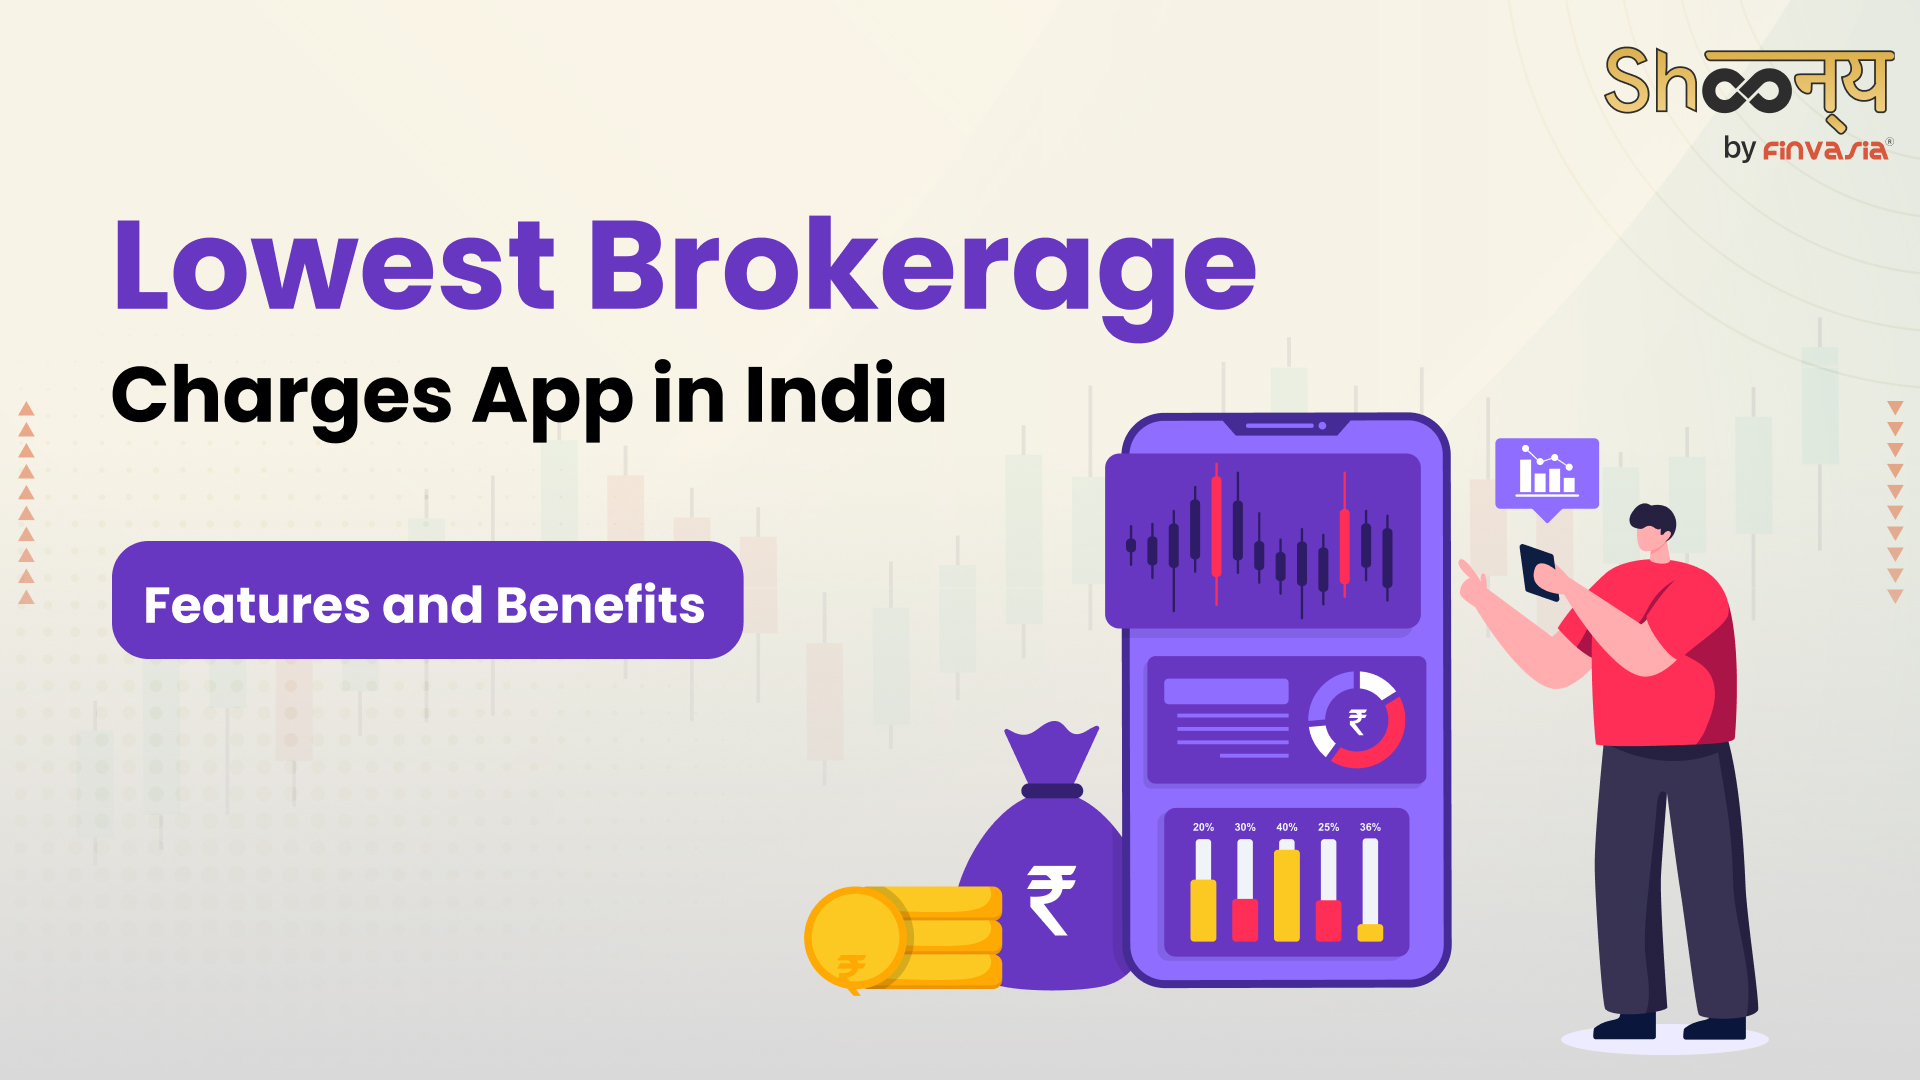 Who Offers the Lowest Brokerage Charges in India?